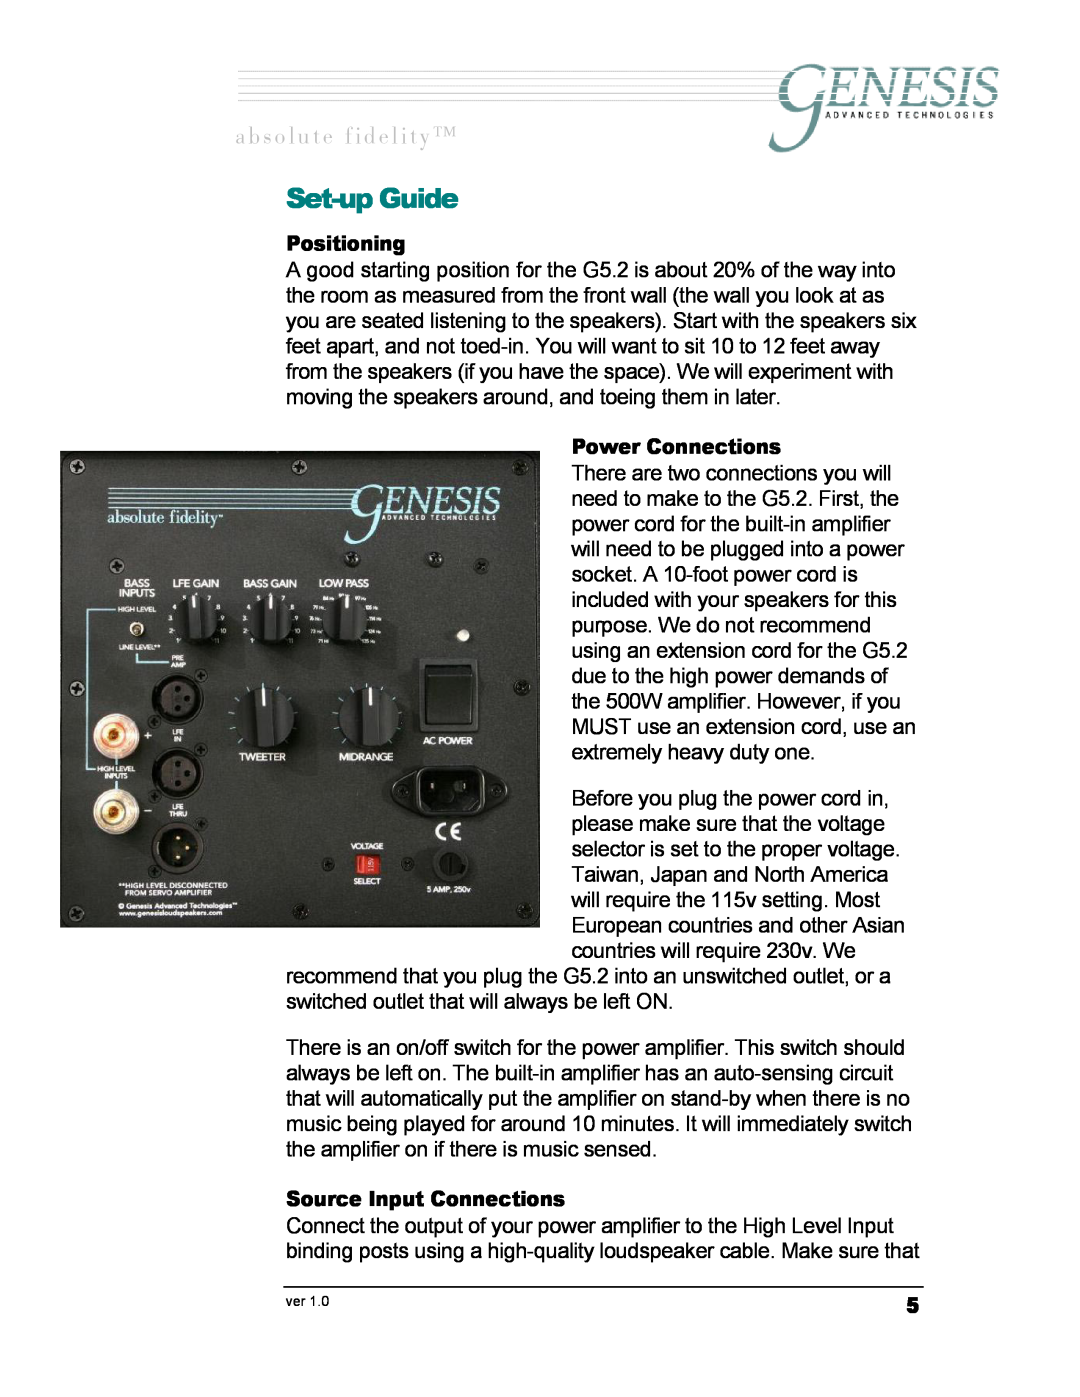 Genesis I.C.E Genesis 5.2 owner manual Set-upGuide, ~ Ä ë ç ä ì í É = Ñ á Ç É ä á í ó, Positioning, Power Connections 